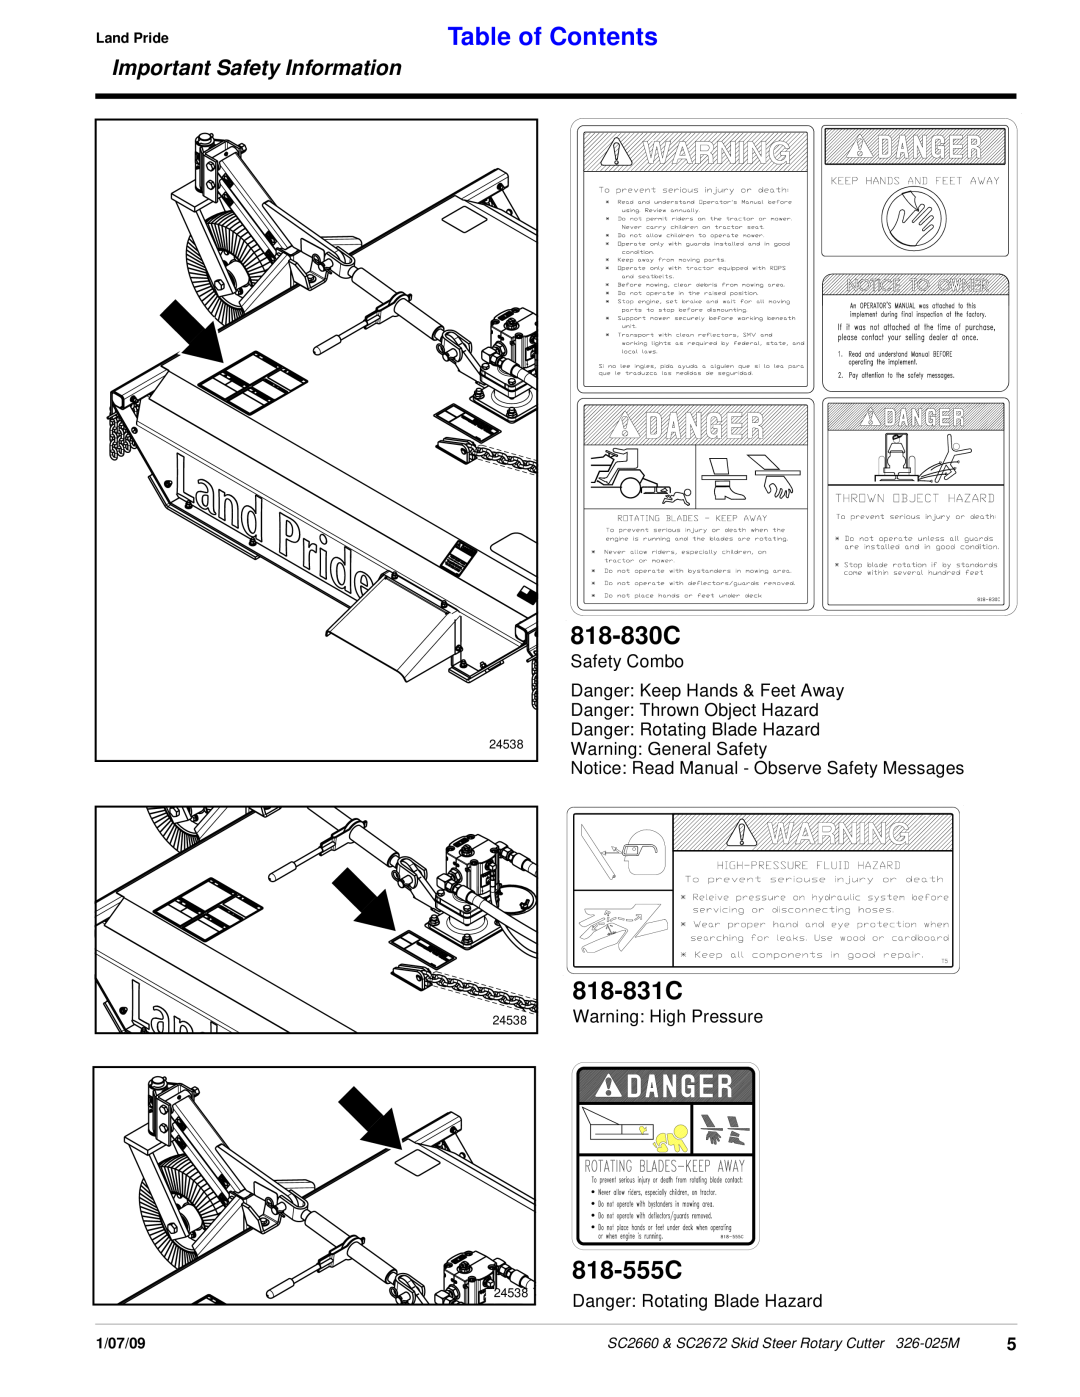 Land Pride SC2672 manual 818-830C, 818-831C, 818-555C, Table of Contents, Important Safety Information, Land Pride, 1/07/09 